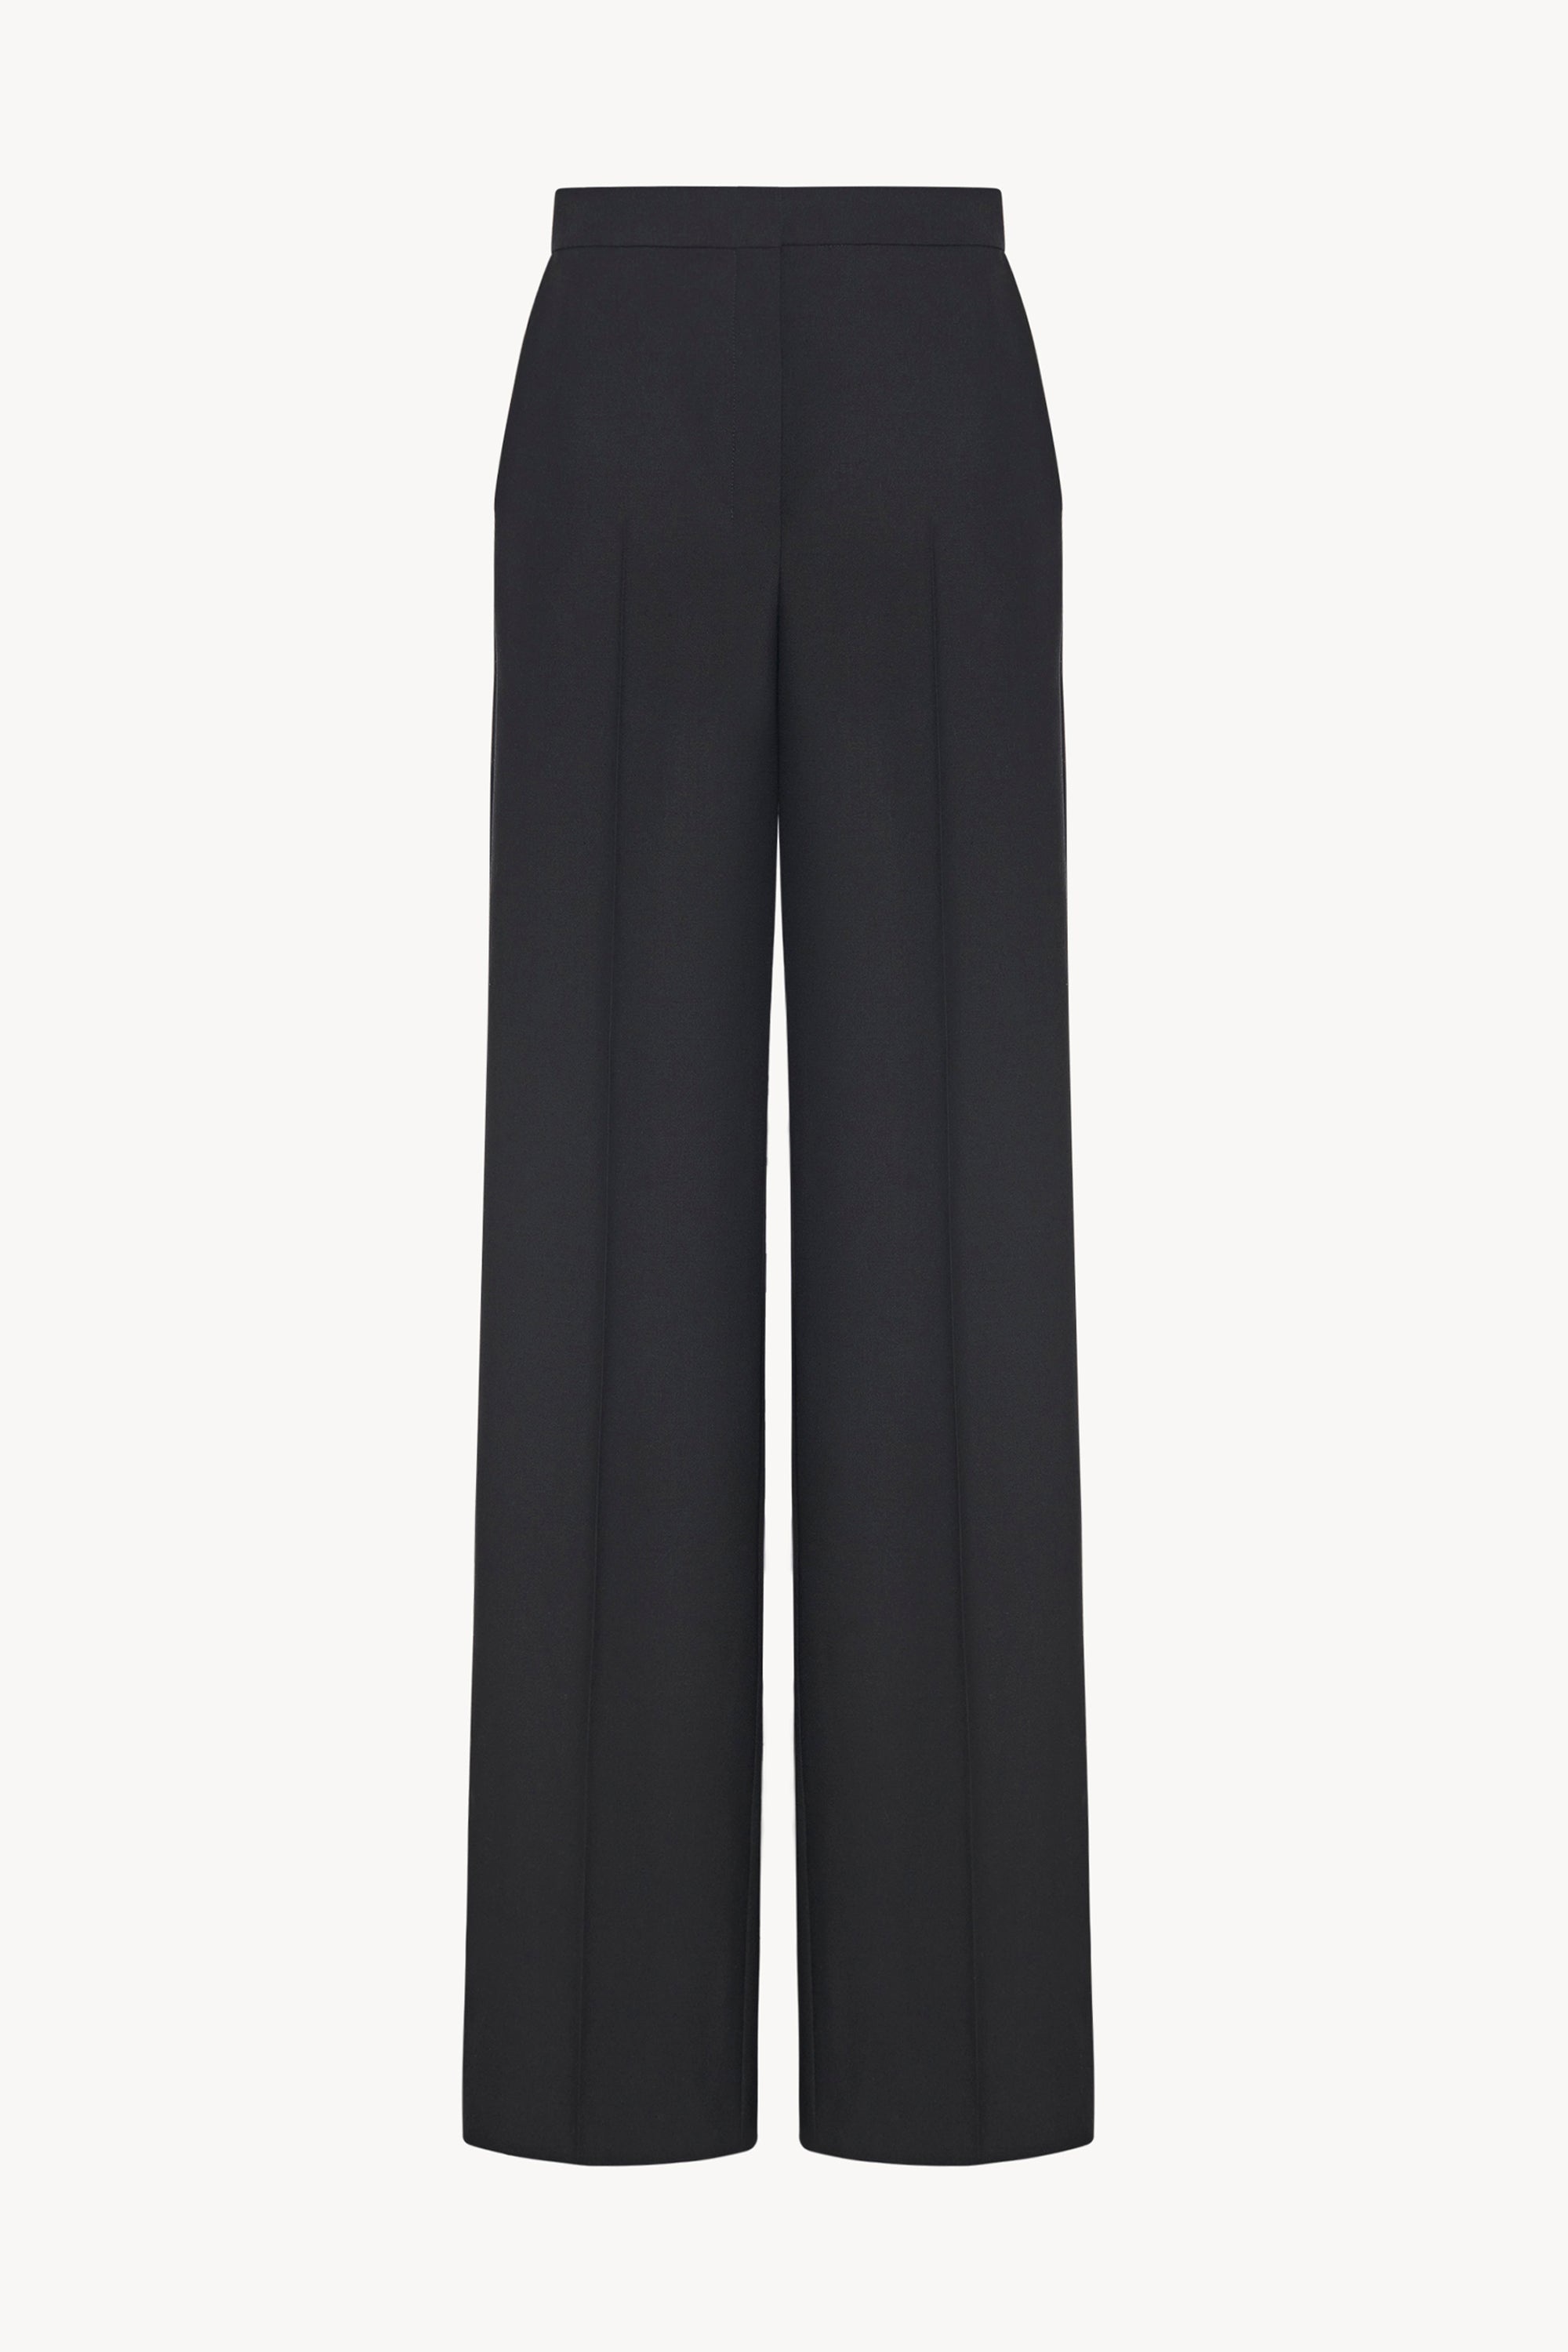 Delton Pant in Wool and Mohair - 1